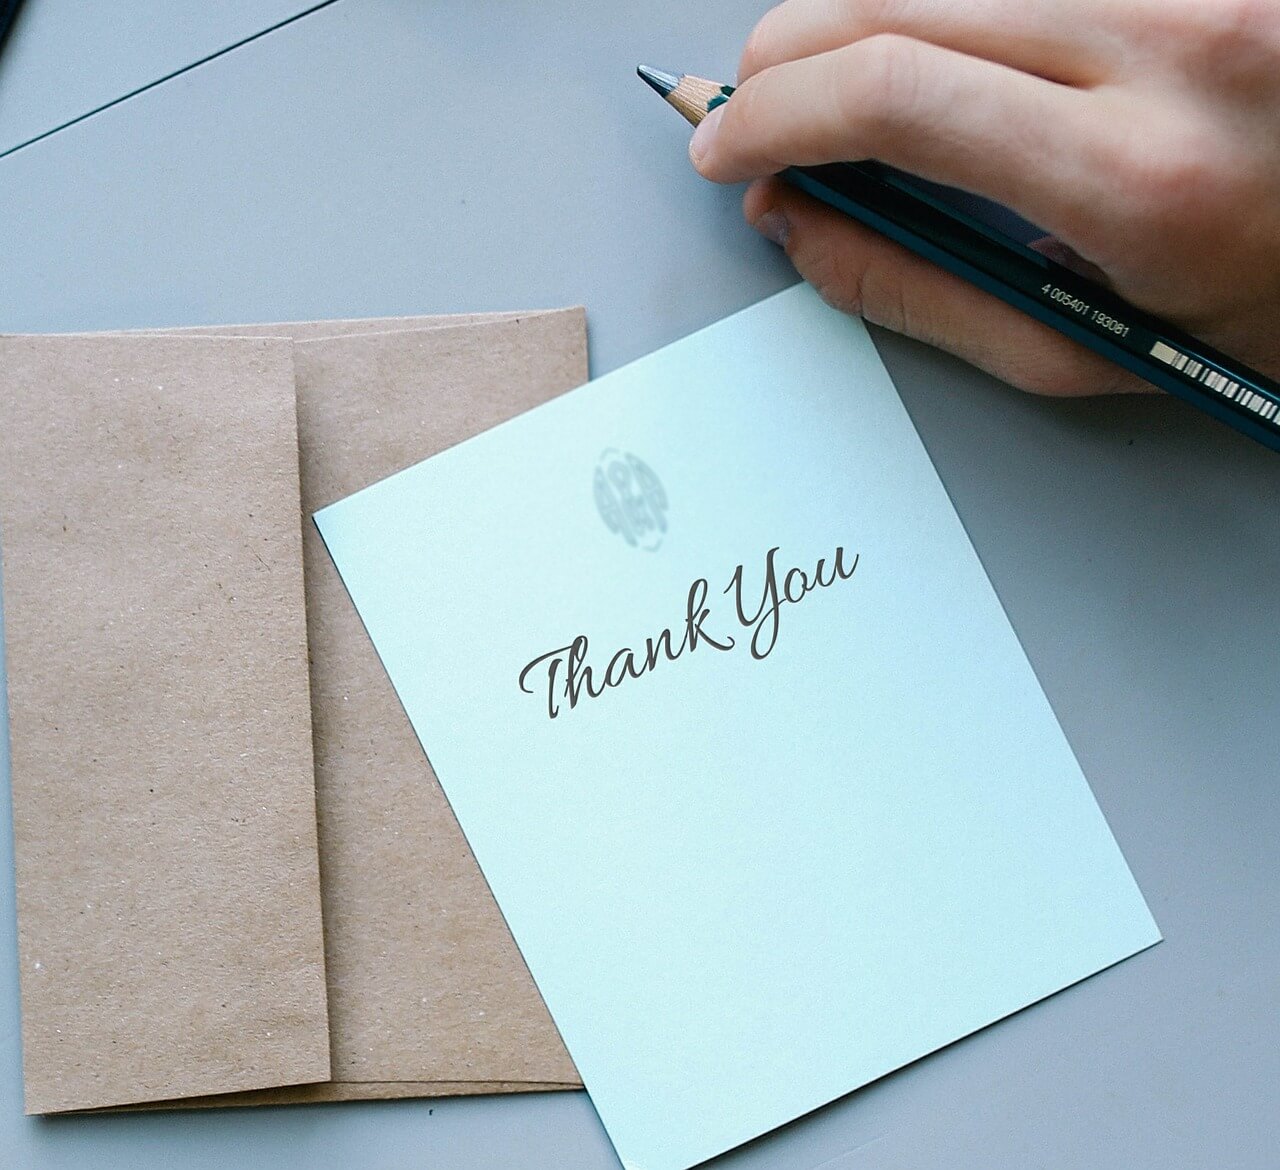 Thank you card for donors